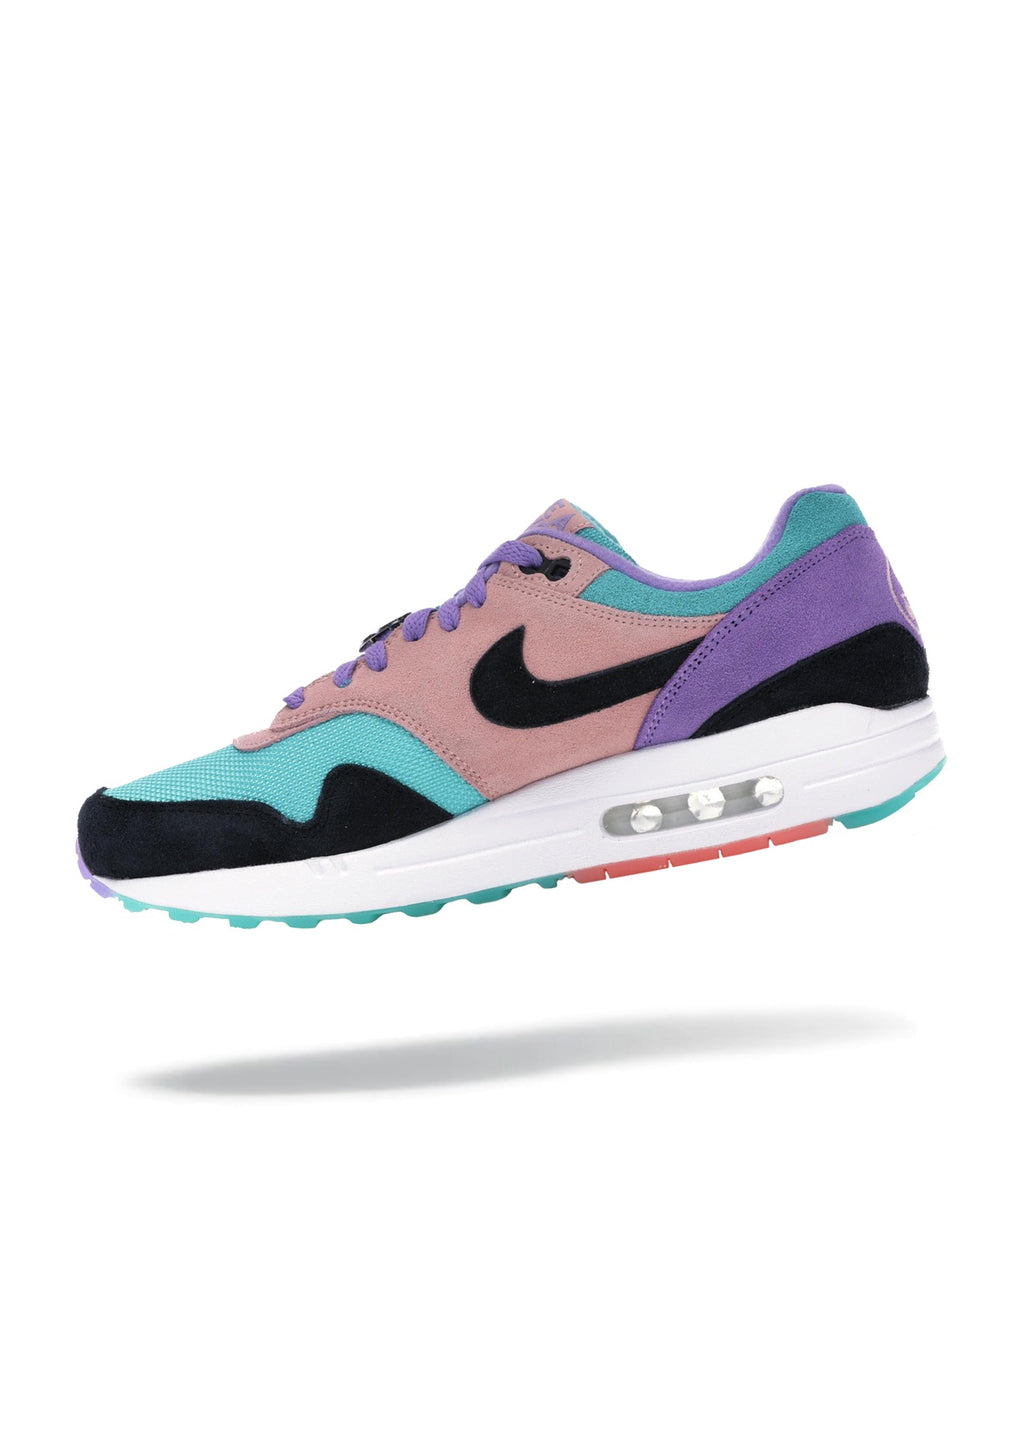 Air Max 1 “Have a Nike day”